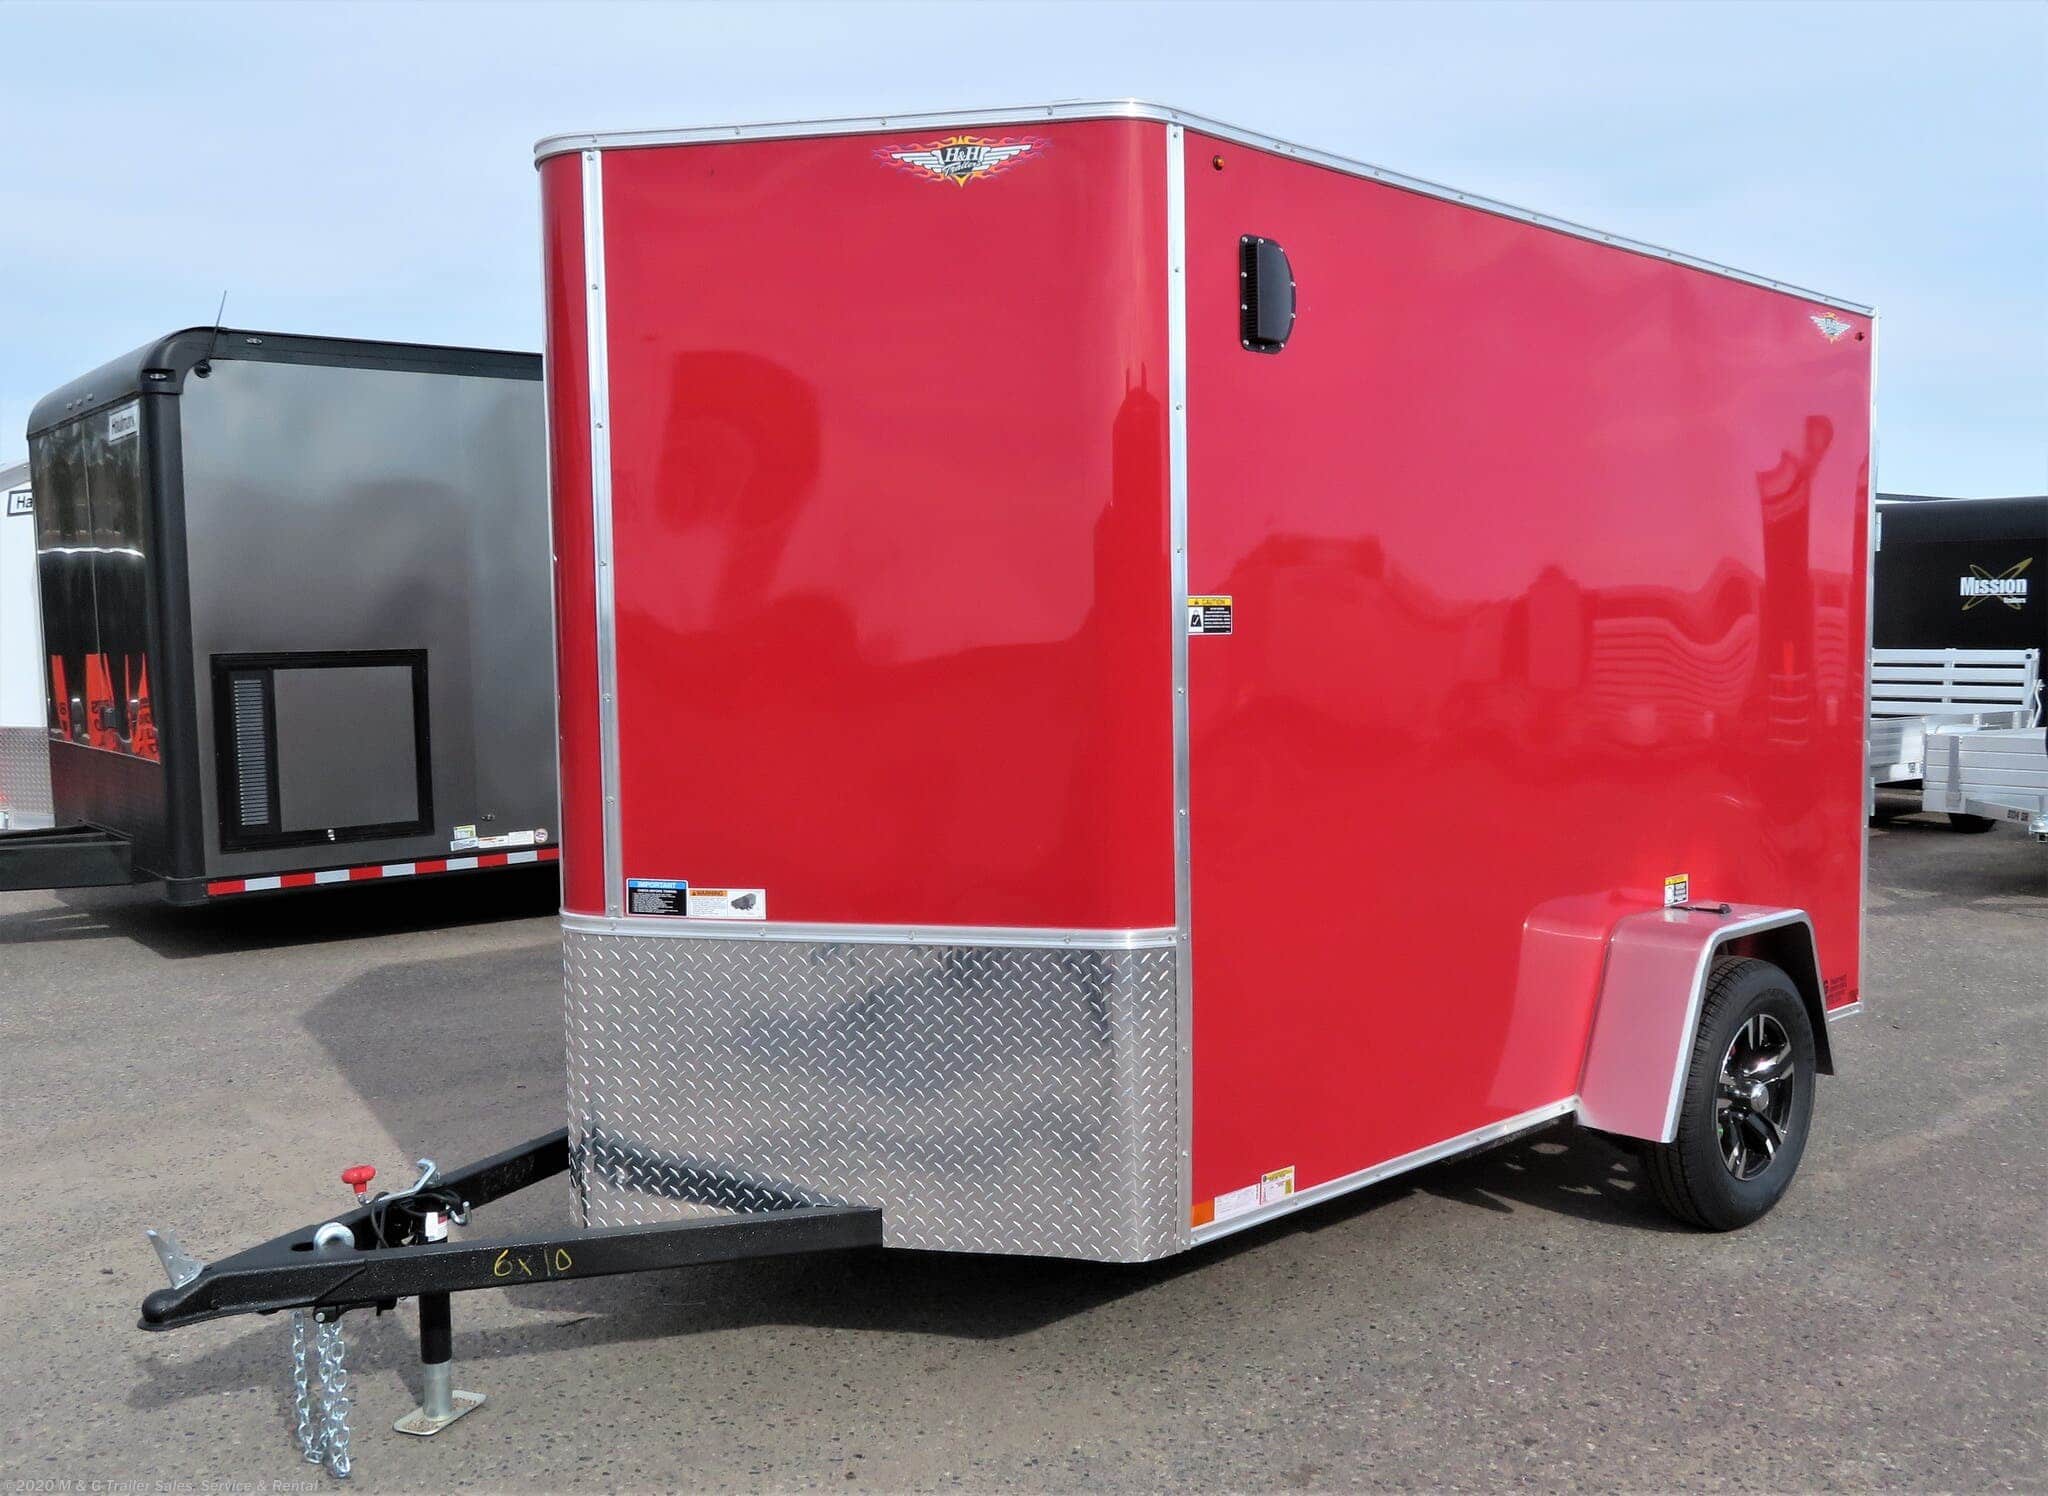 5 Things to Ask Before Buying a Cargo Trailer